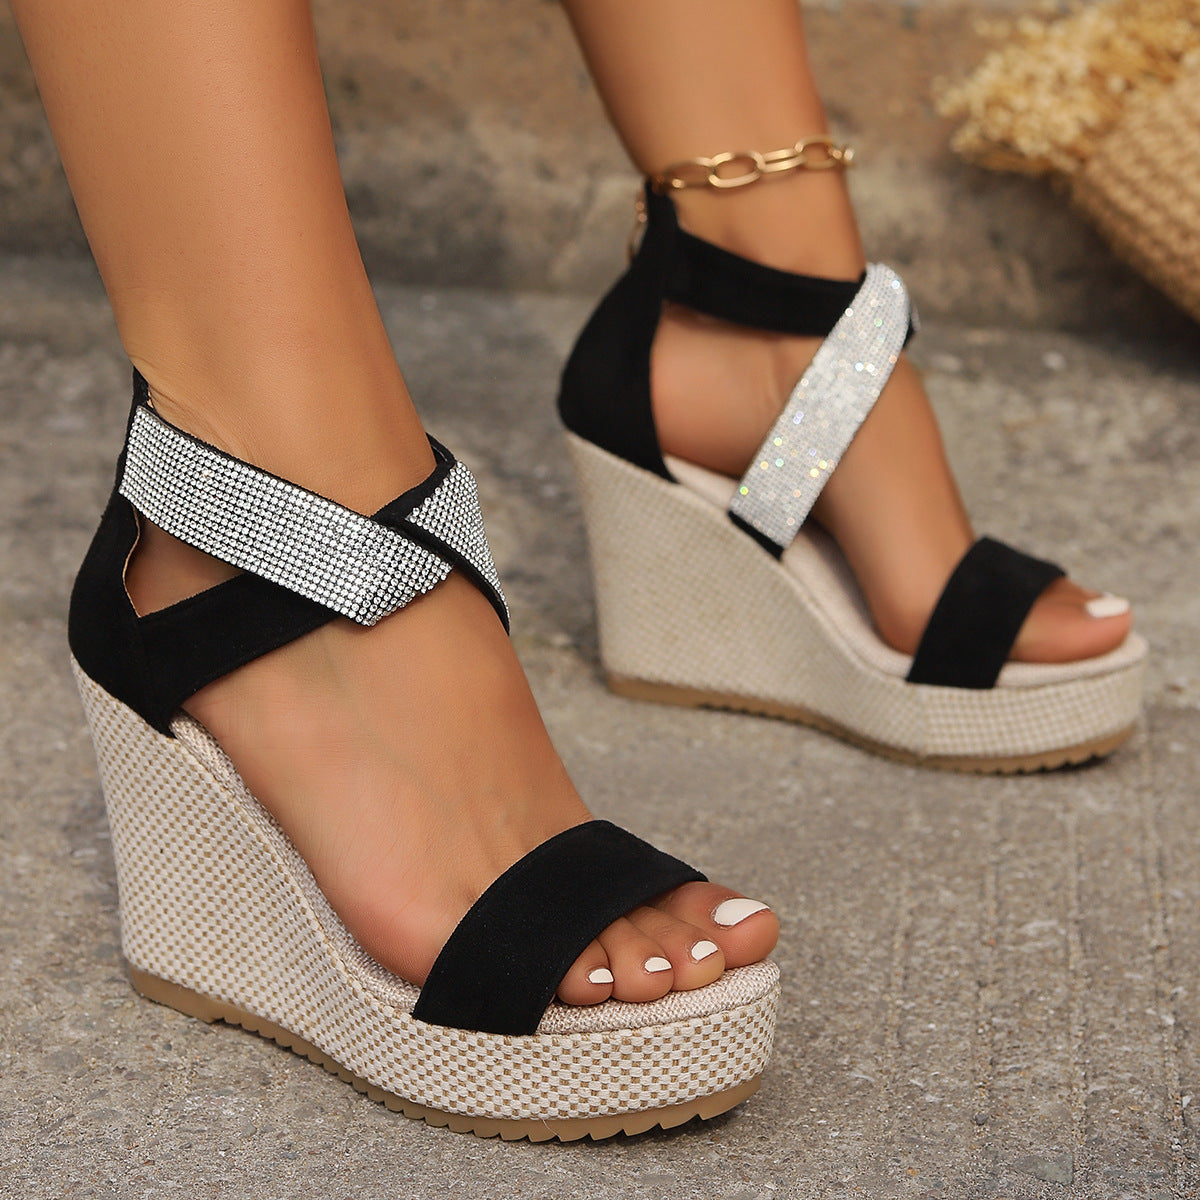 Fish Mouth High Wedges Sandals With Rhinestone Design Fashion Summer Platform Shoes For Women